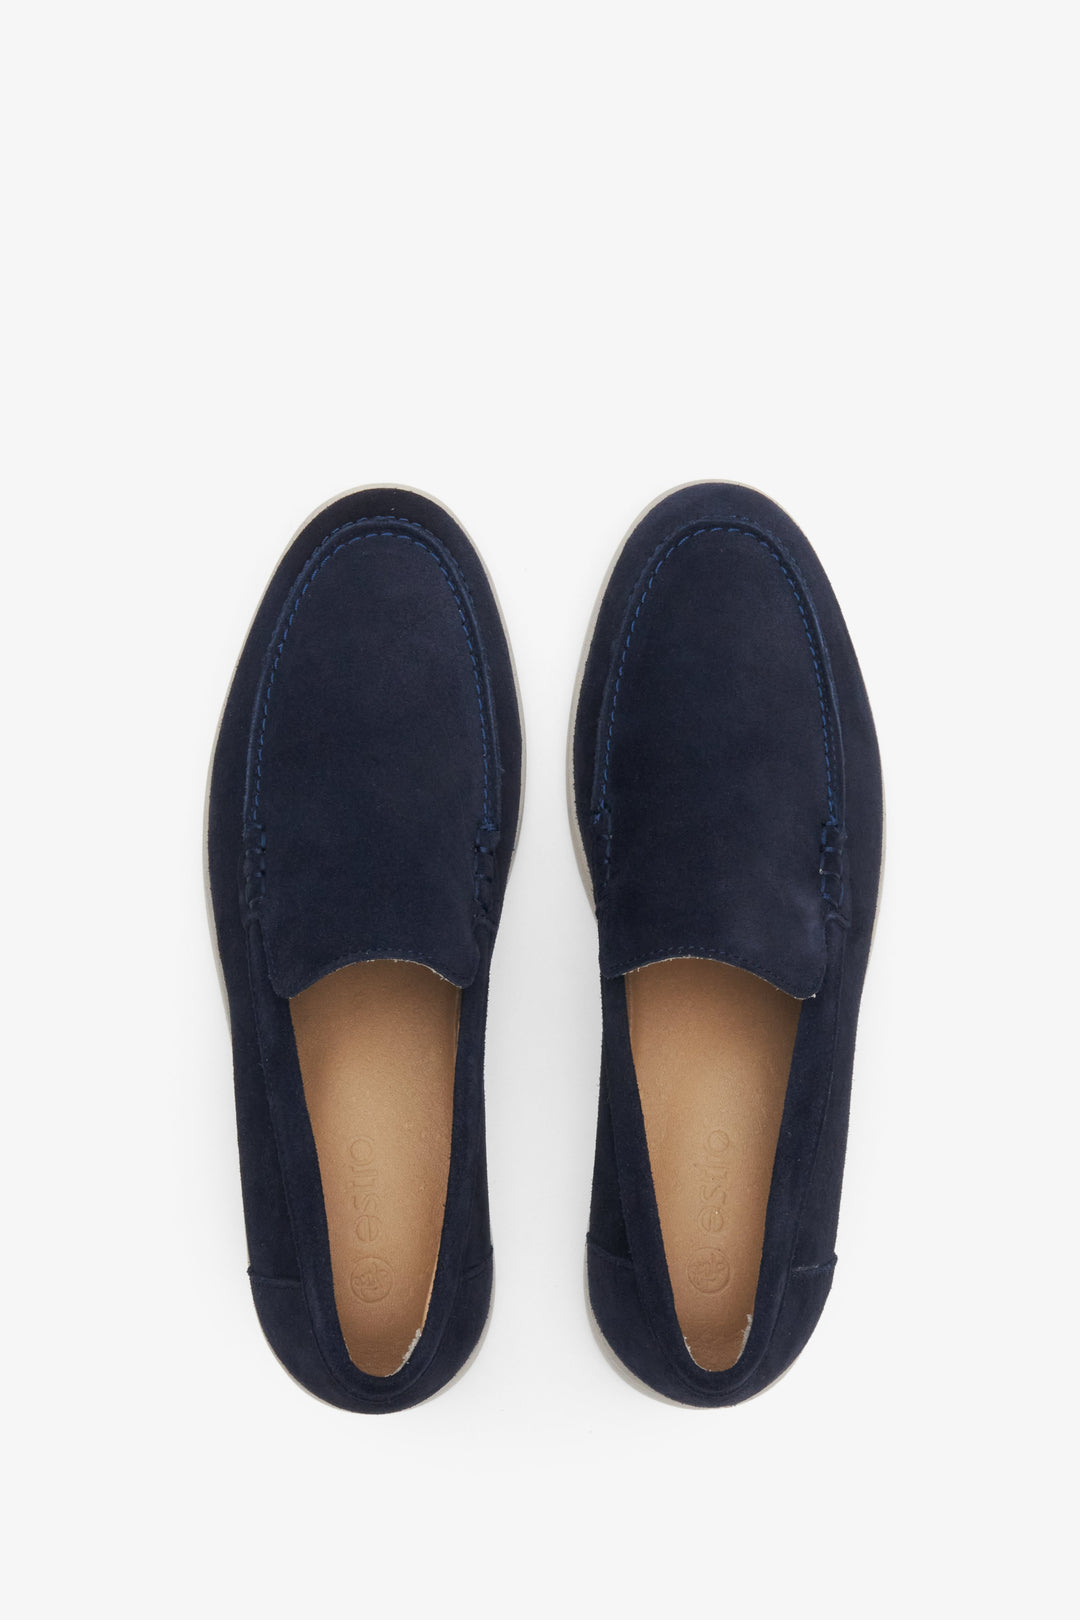 Women's loafers in navy blue velour - presentation of the shoe from above.